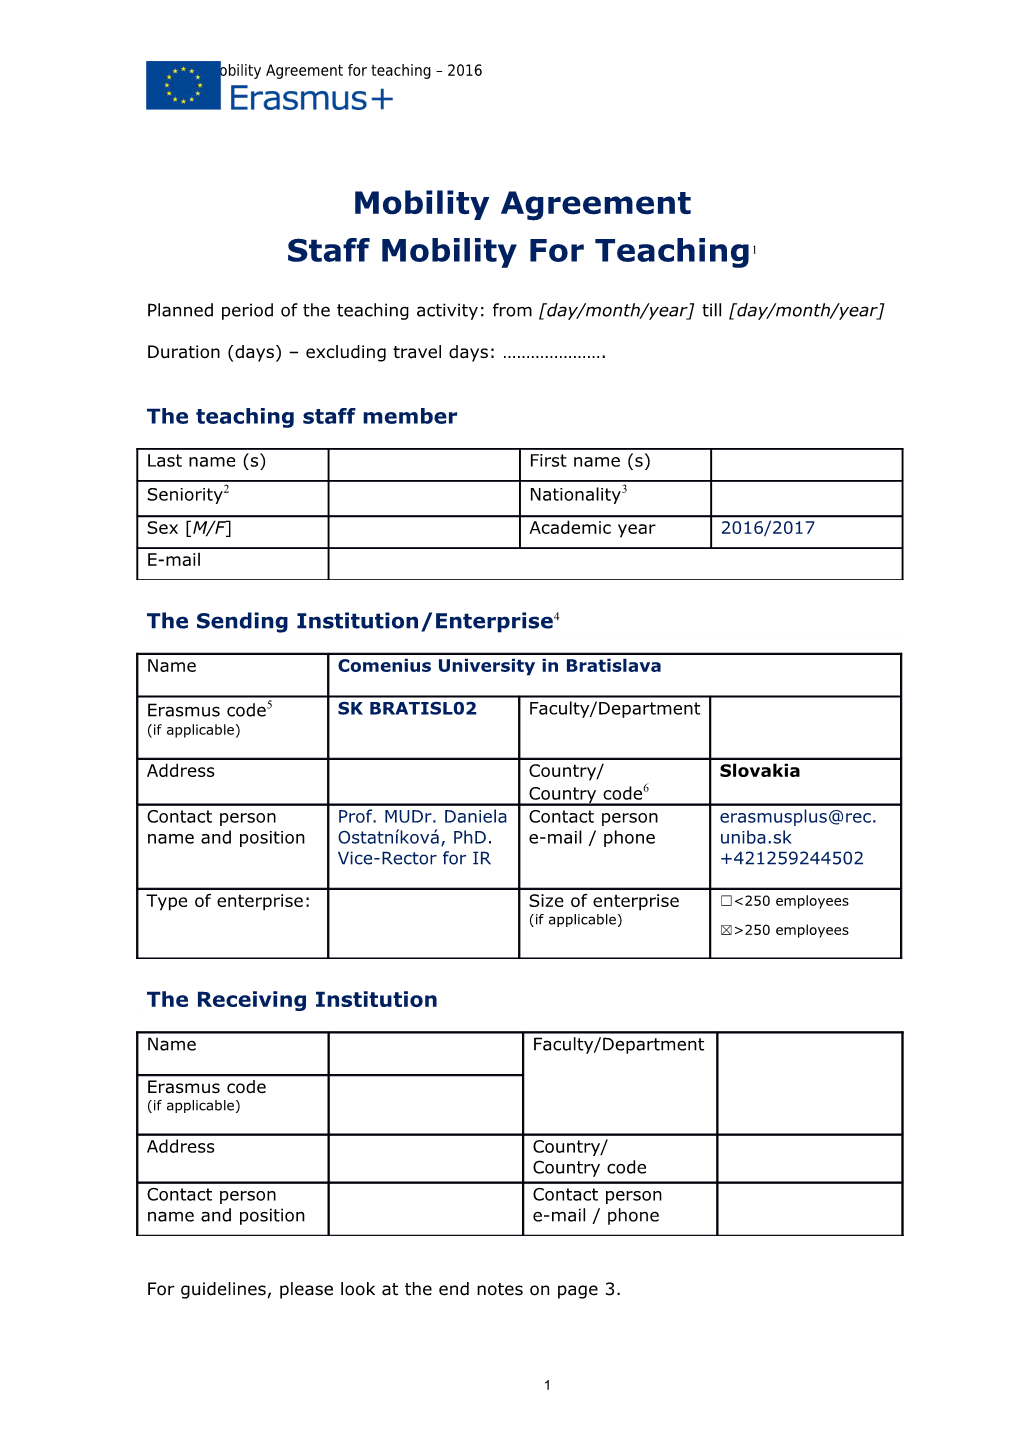 HE Staff Mobility Agreement for Teaching 2016